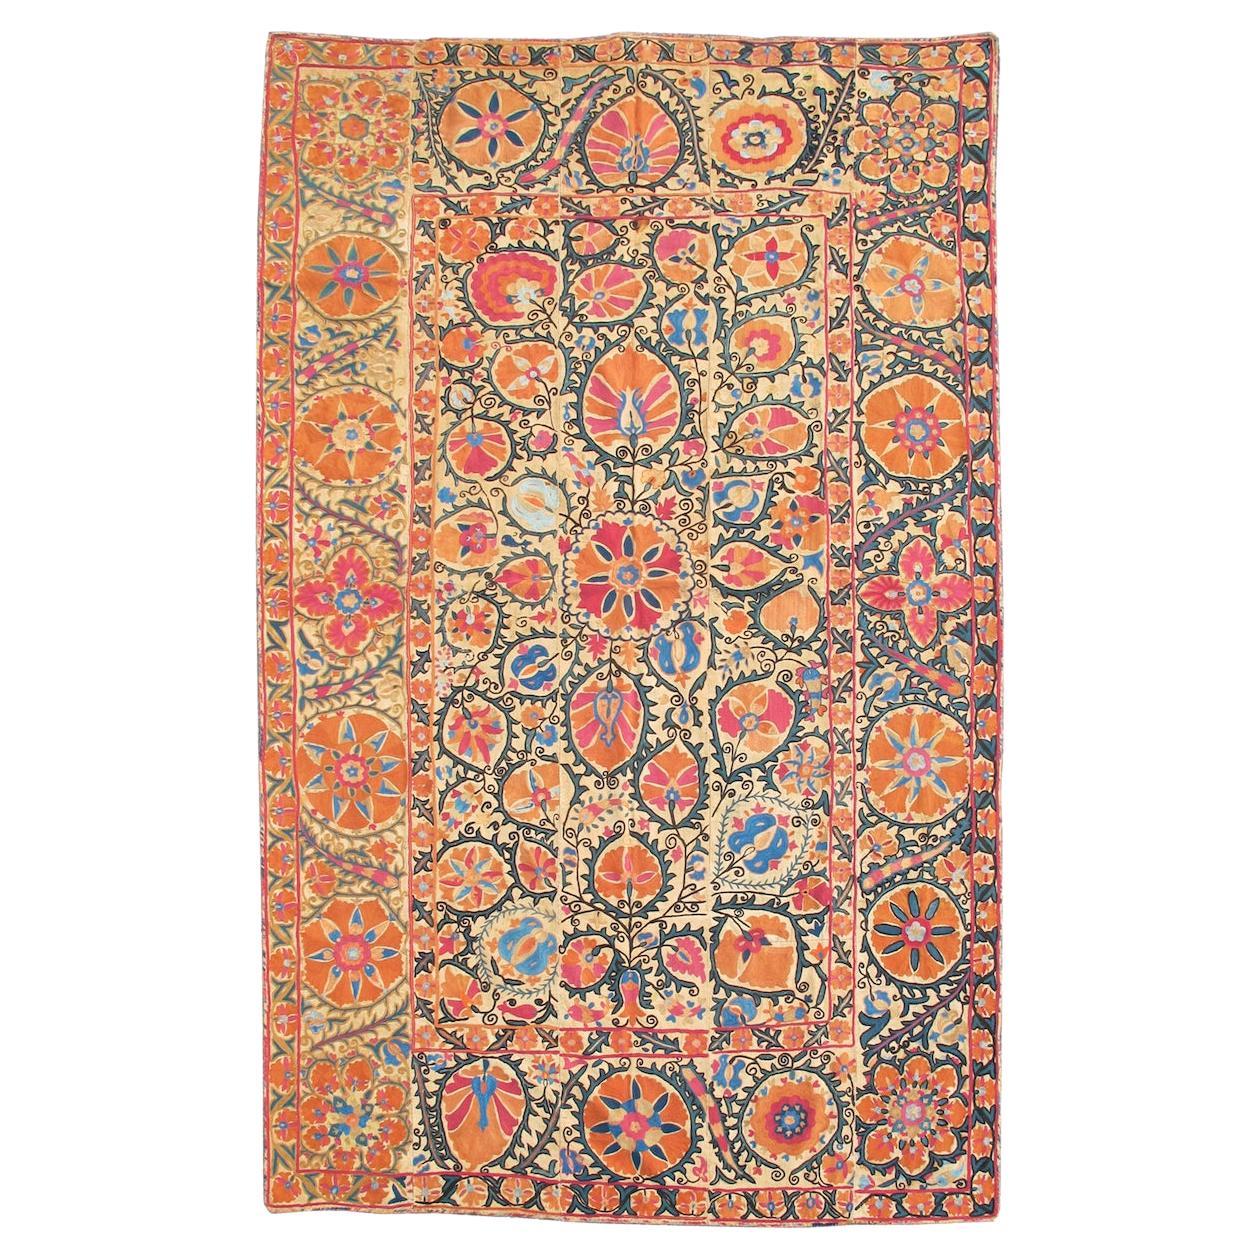 Antique Uzbek Bokhara Suzani Wall-Hanging Tapestry, Mid-19th Century For Sale